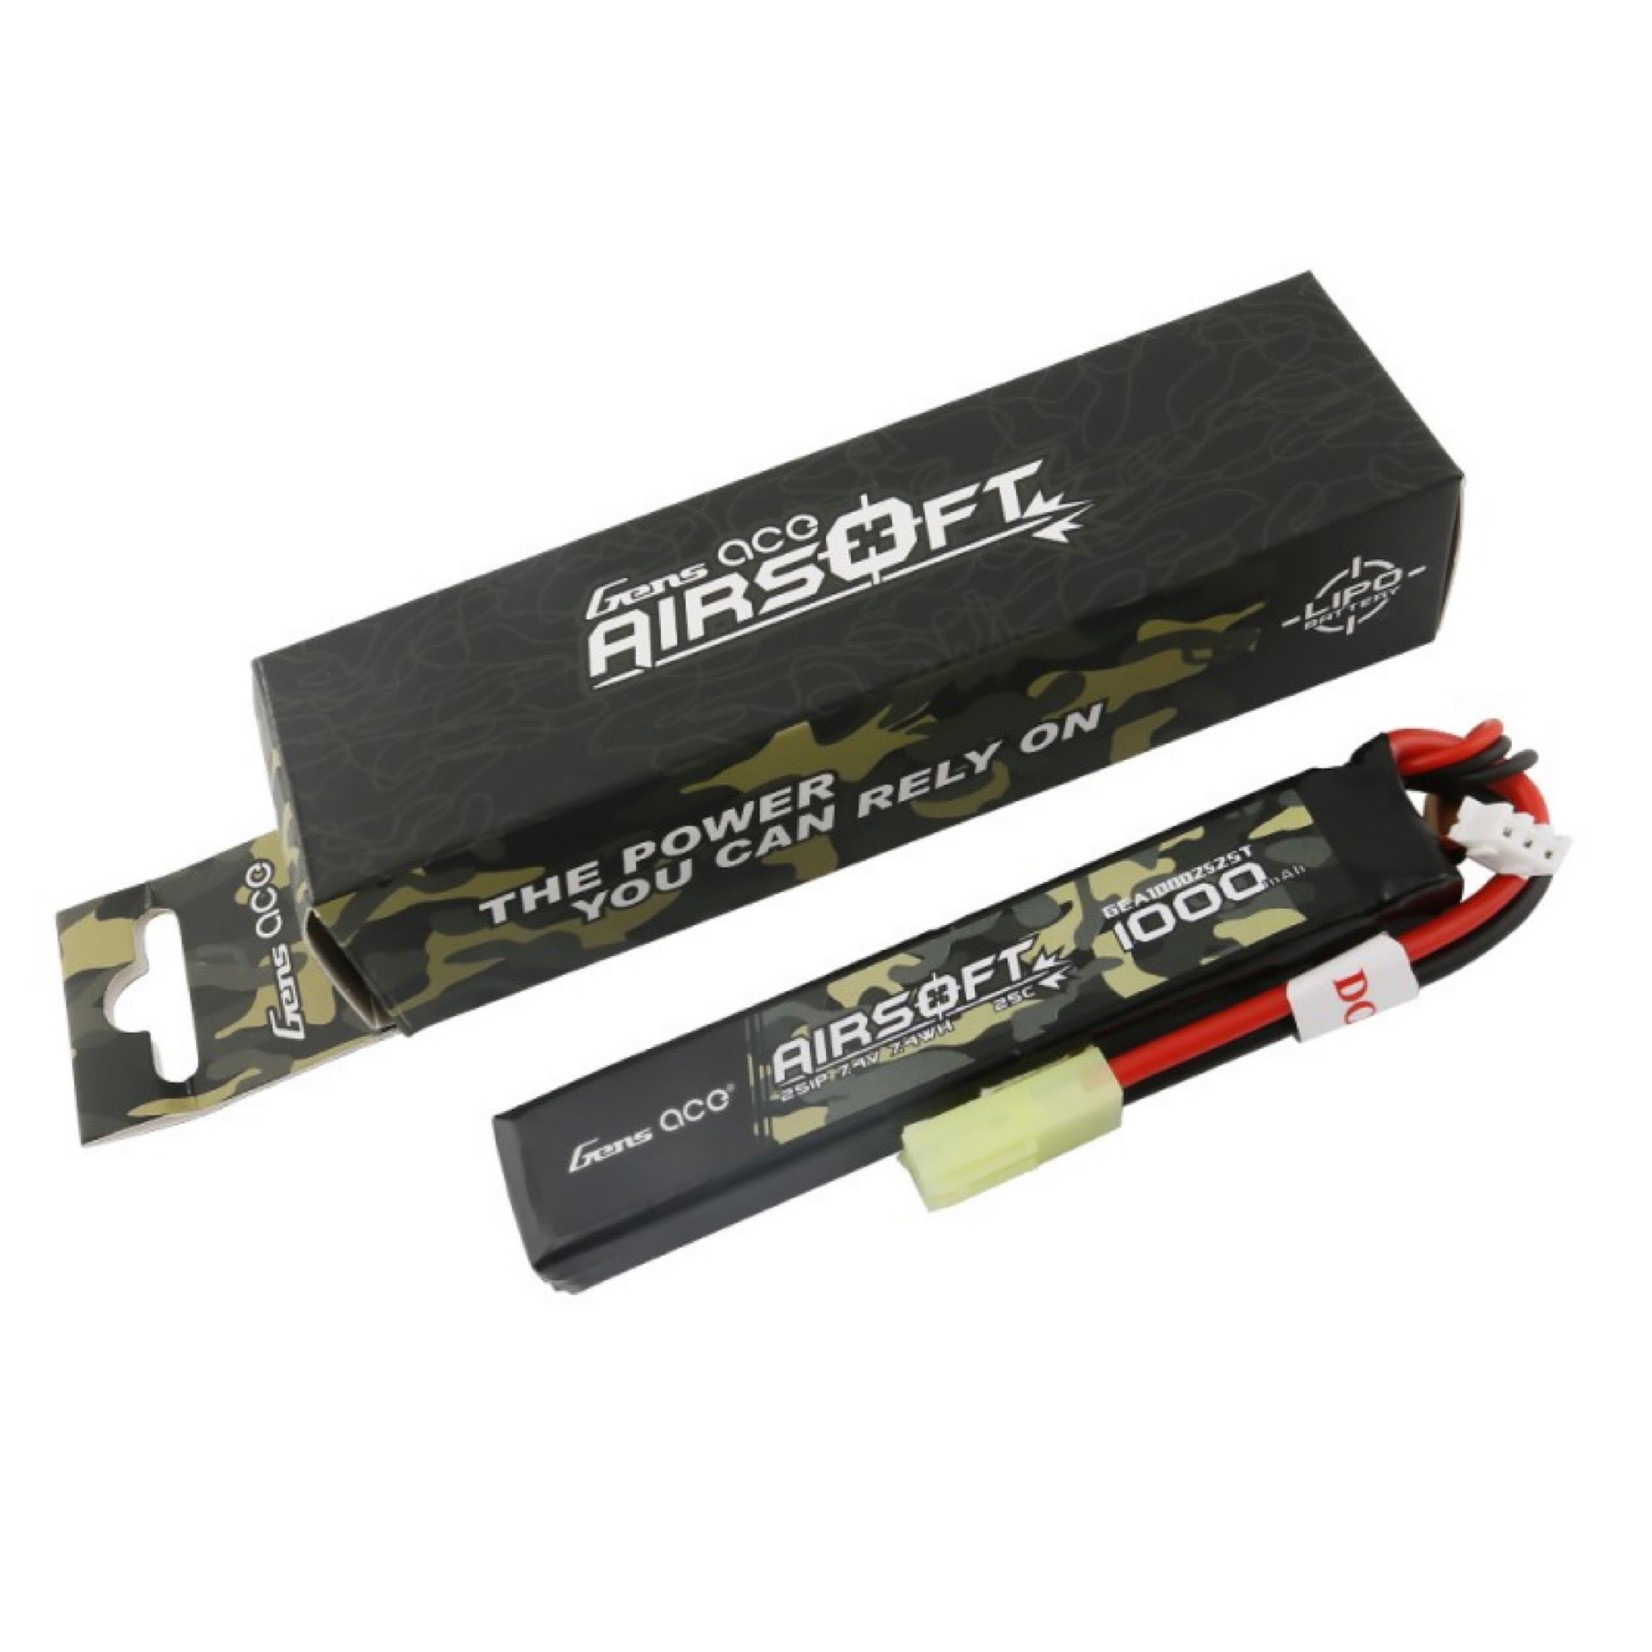 Gens Ace Gens Ace 2S 25C Airsoft Battery w/Tamiya Plug (7.4V/1000mAh) #GEA10002S25T